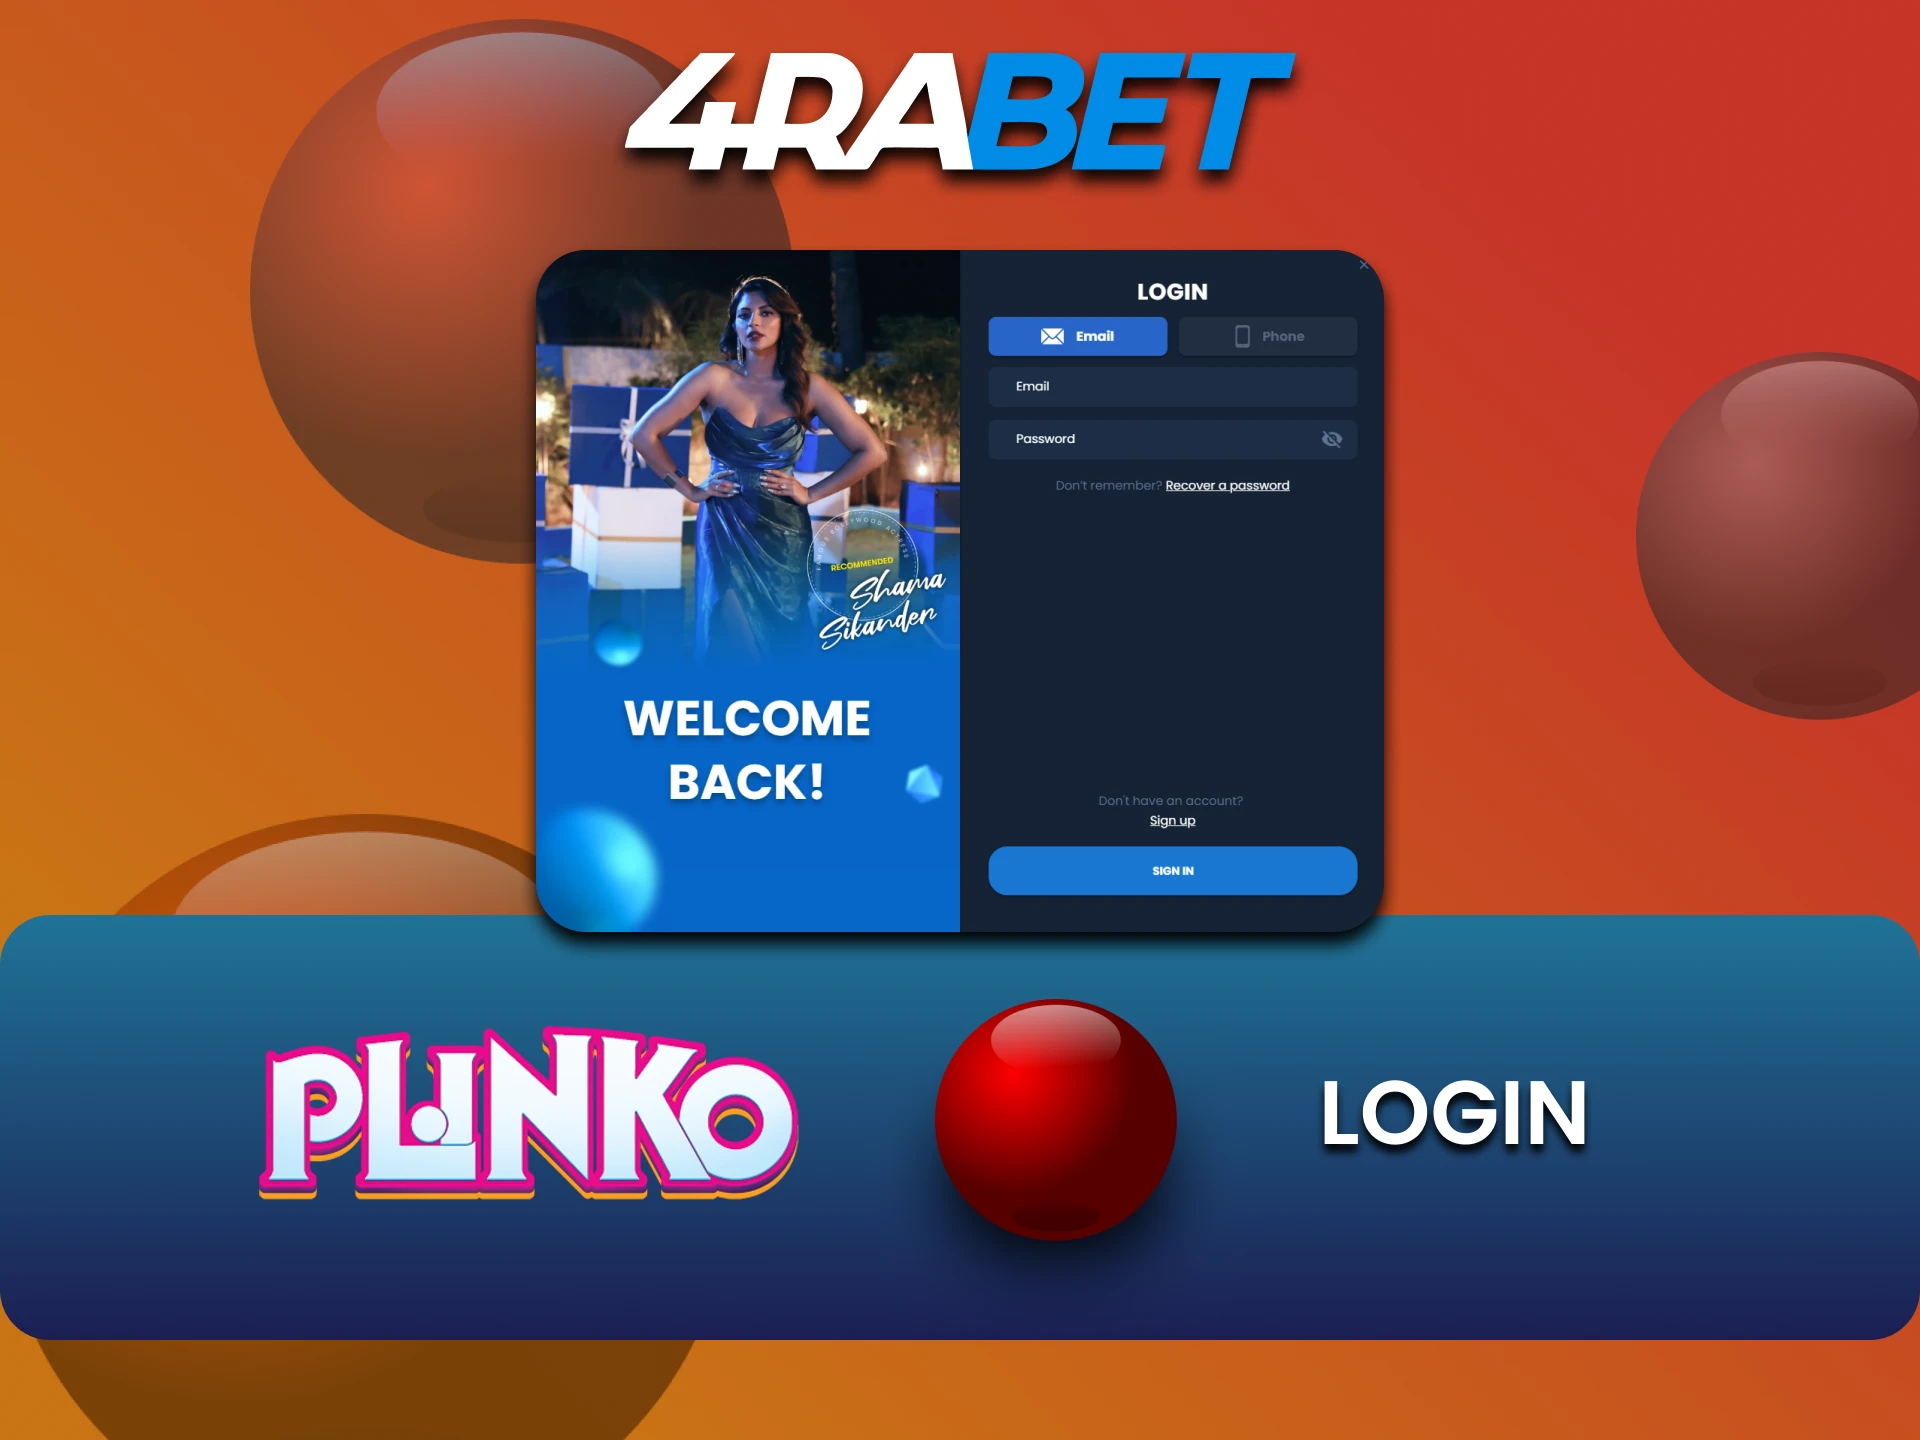 Login to your 4rabet account to play Plinko.